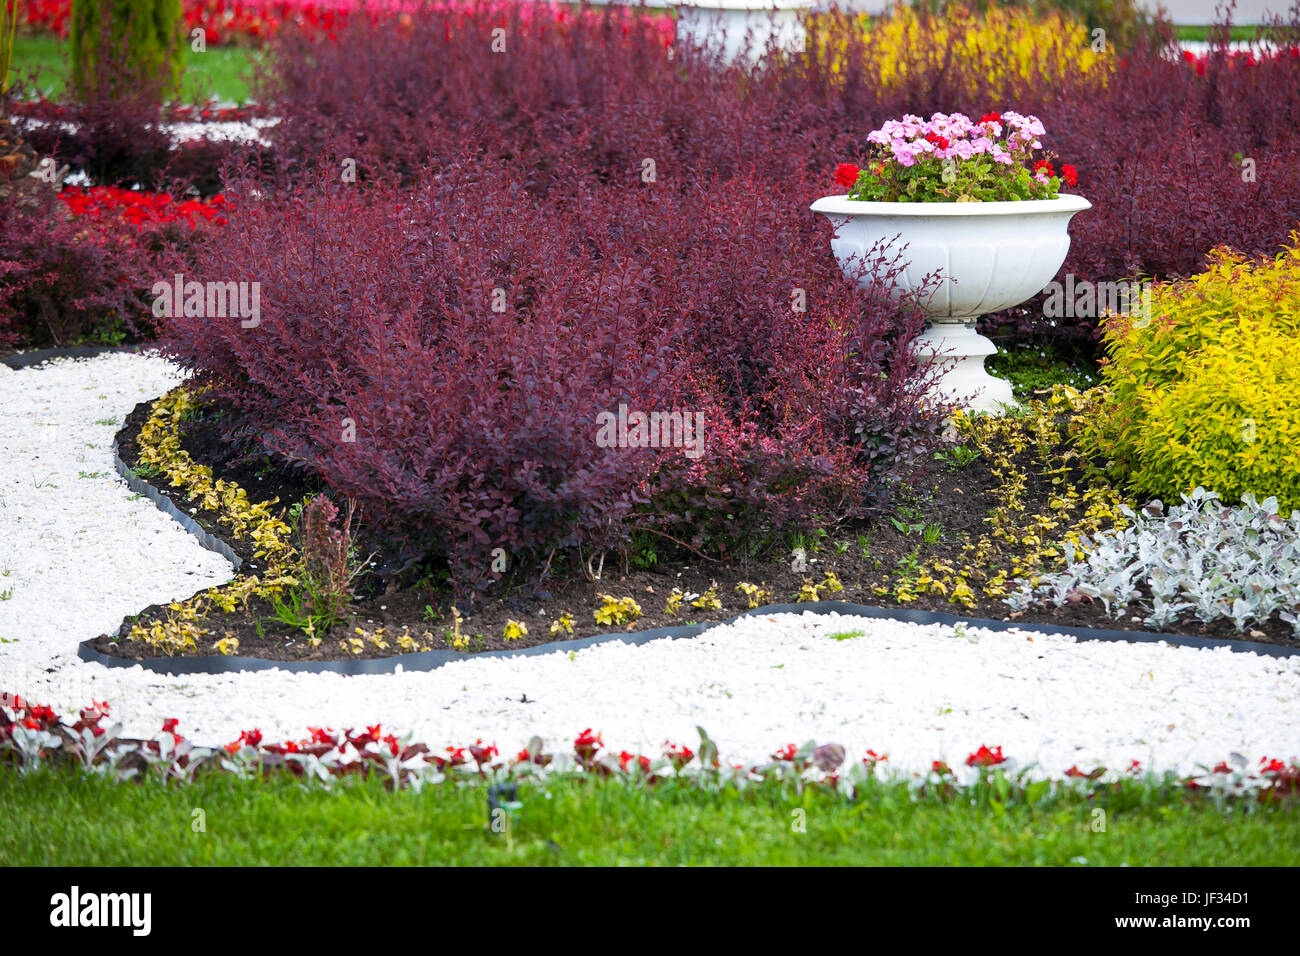 Decorative flowerbed with multi-colored shrubs with ceramic vases with geraniums Stock Photo